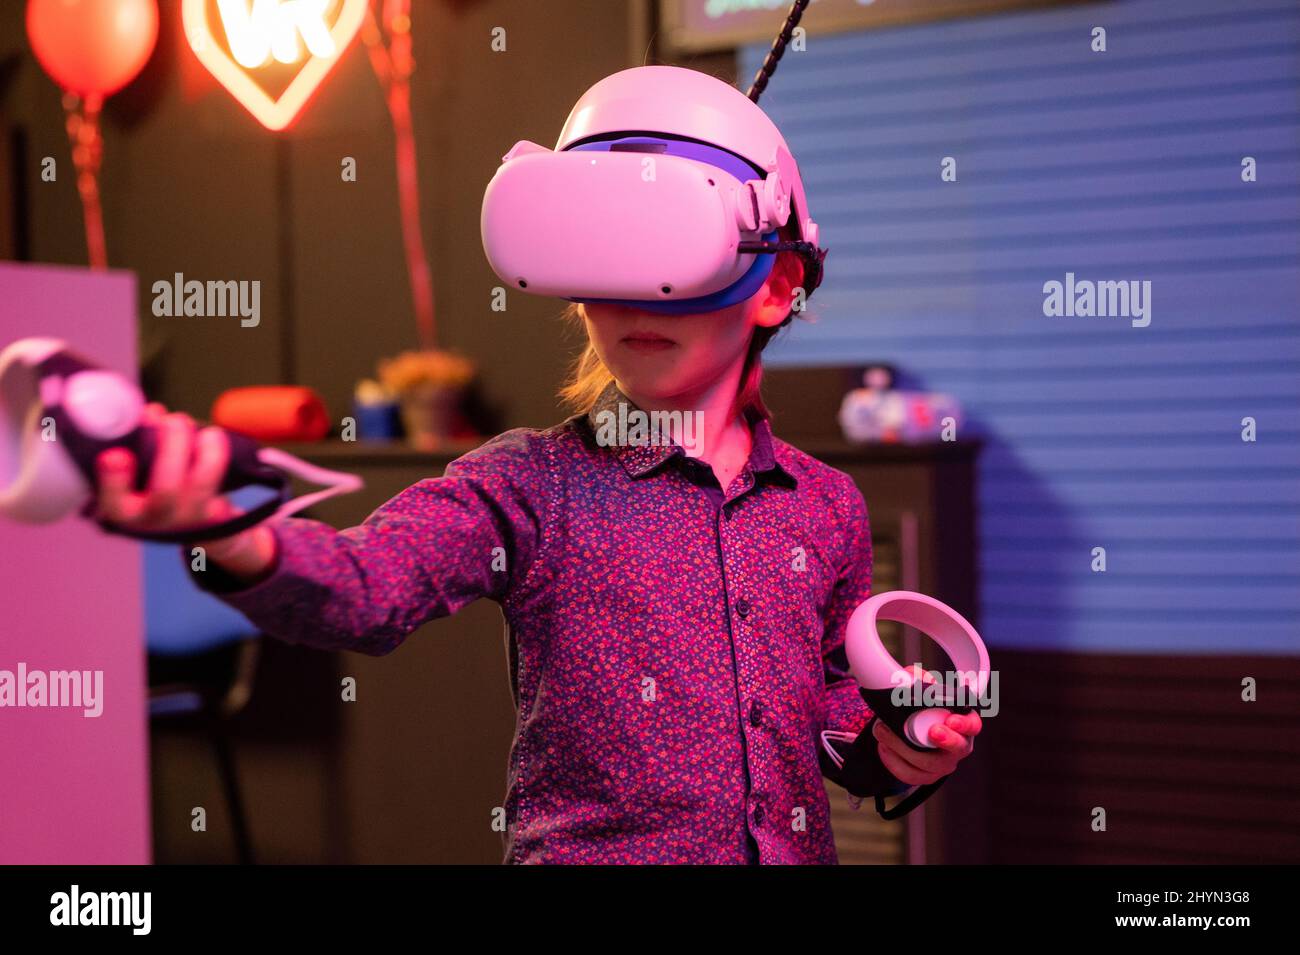 vr game and virtual reality. kid boy gamer six years old fun playing on futuristic simulation video game in 3d glasses and joysticks in entertainment Stock Photo